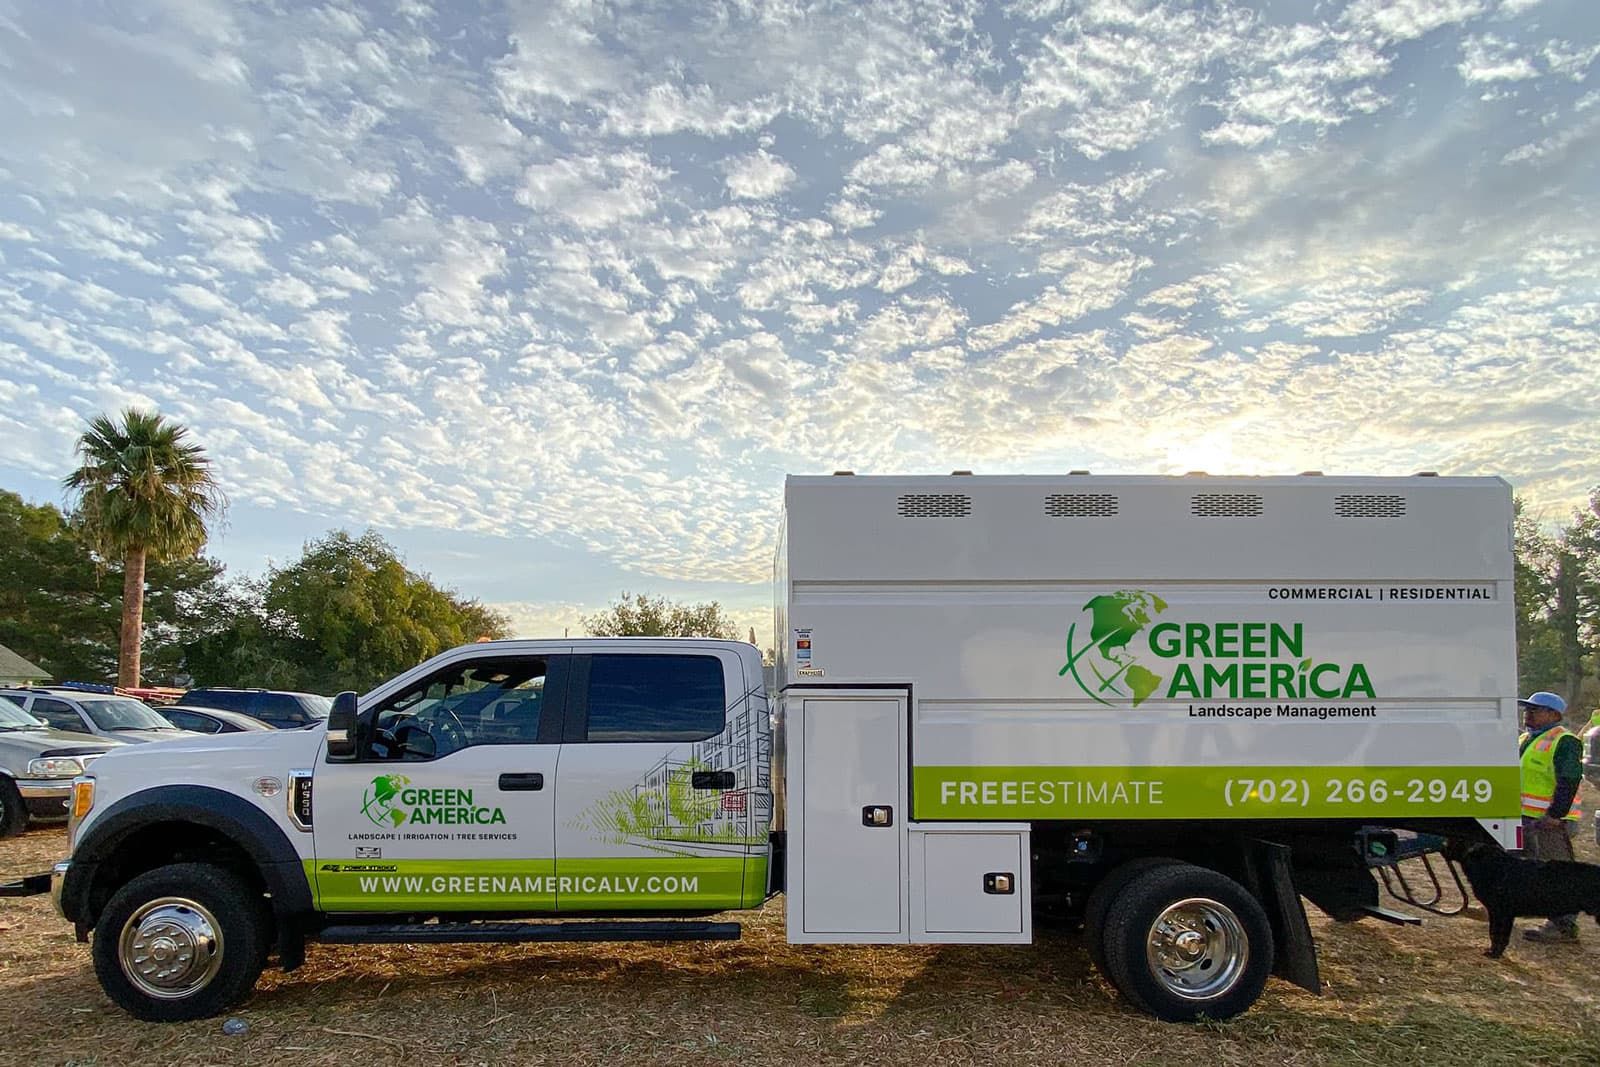 Green America Commercial Landscaping Vehicle Pictured At A Las Vegas, Nevada Job Site